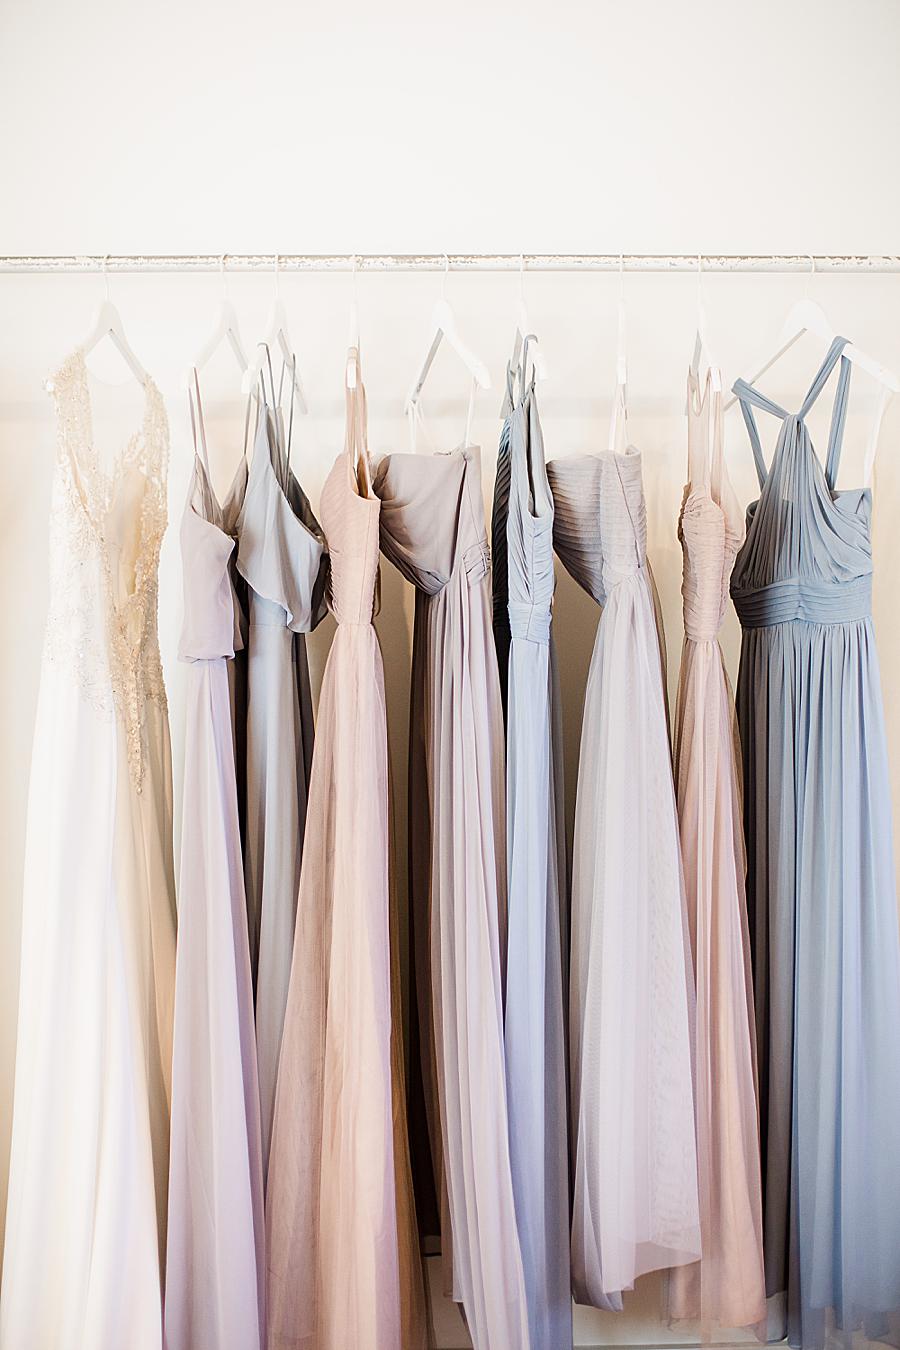 Bridesmaid dresses at this Graystone Quarry wedding by Knoxville Wedding Photographer, Amanda May Photos.